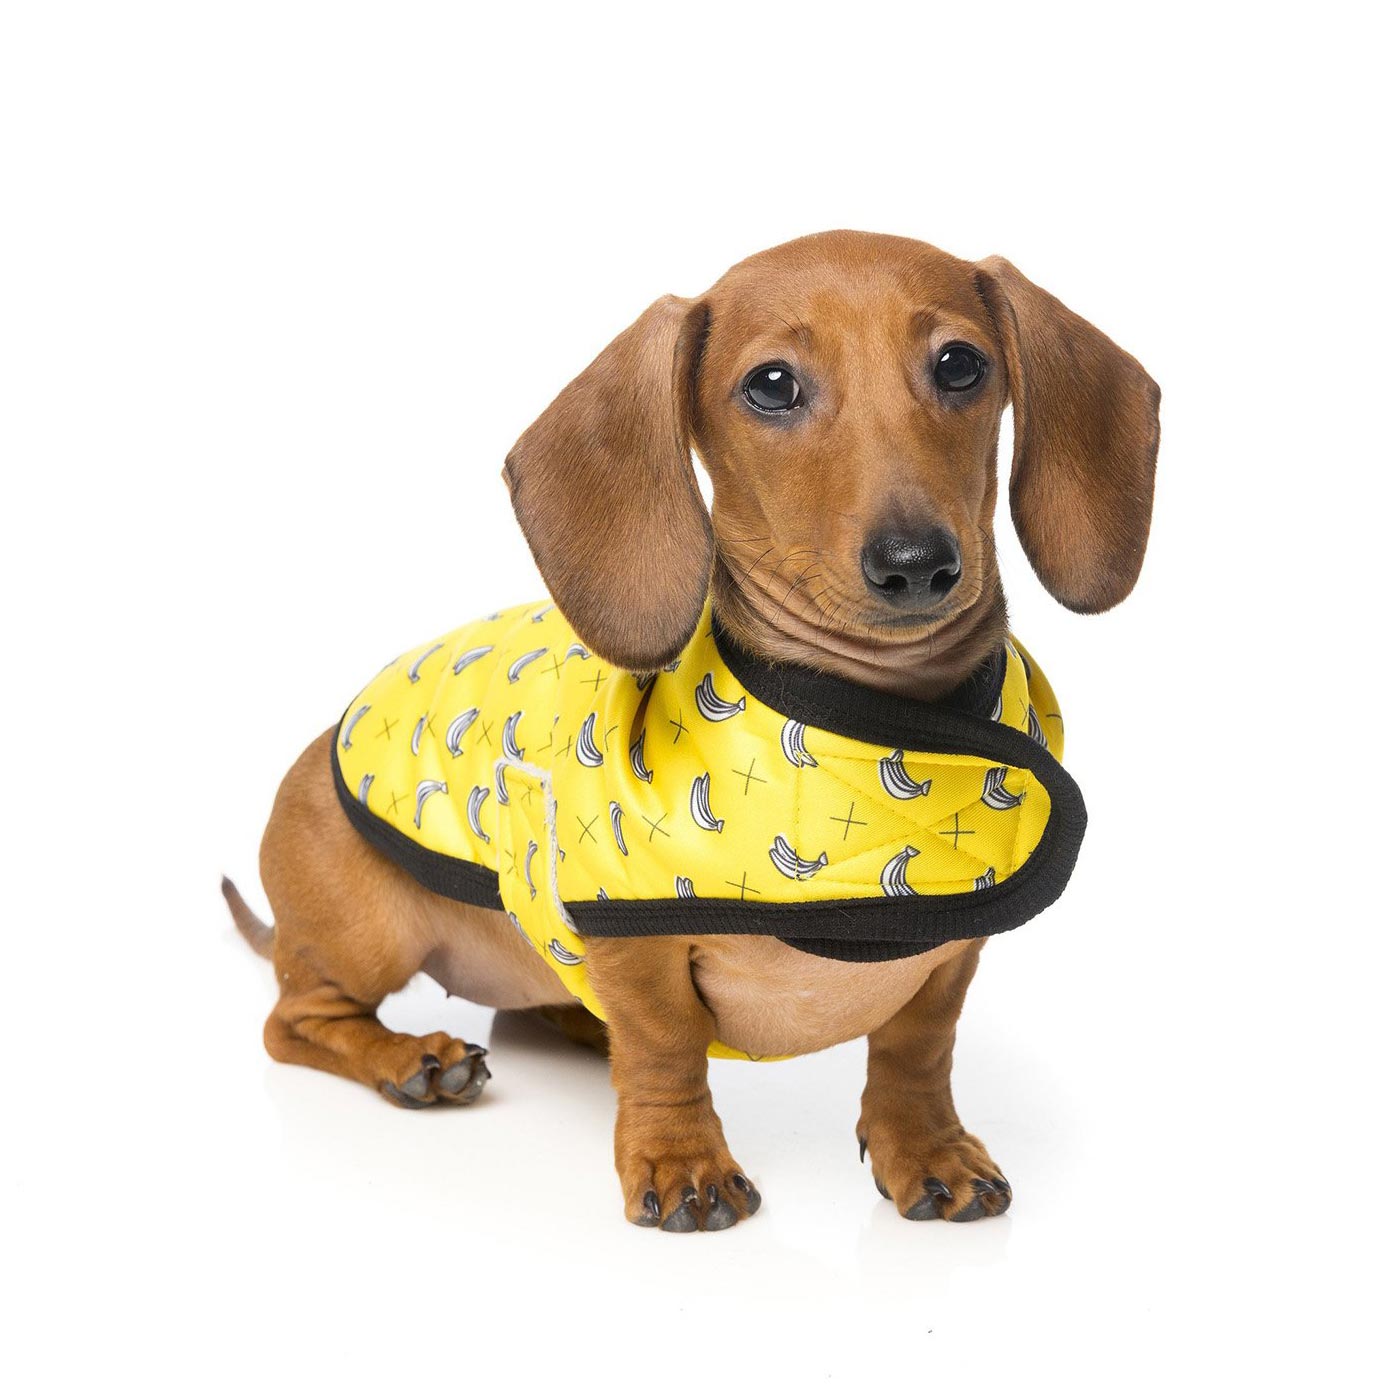 Discover FuzzYard Monkey Mania Wrap Coat. Featuring Velcro fastened straps, and Machine washable. Available in 4 sizes at Lords & Labradors US